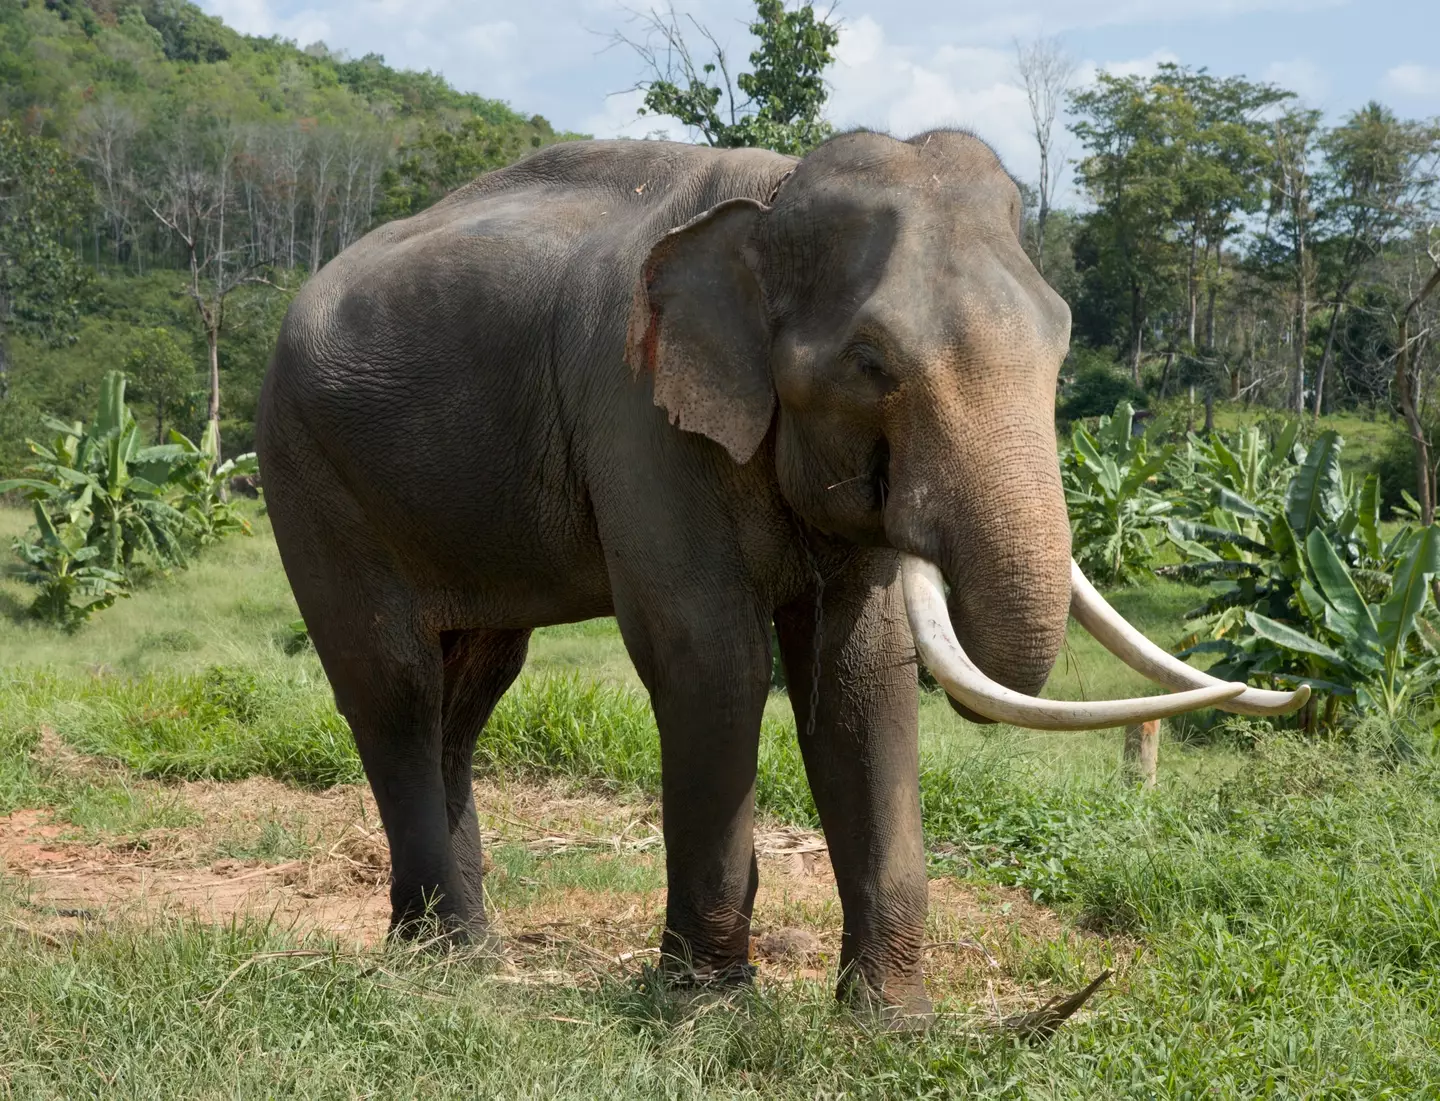 The animal is a 99.6 percent match with the Asian elephant.